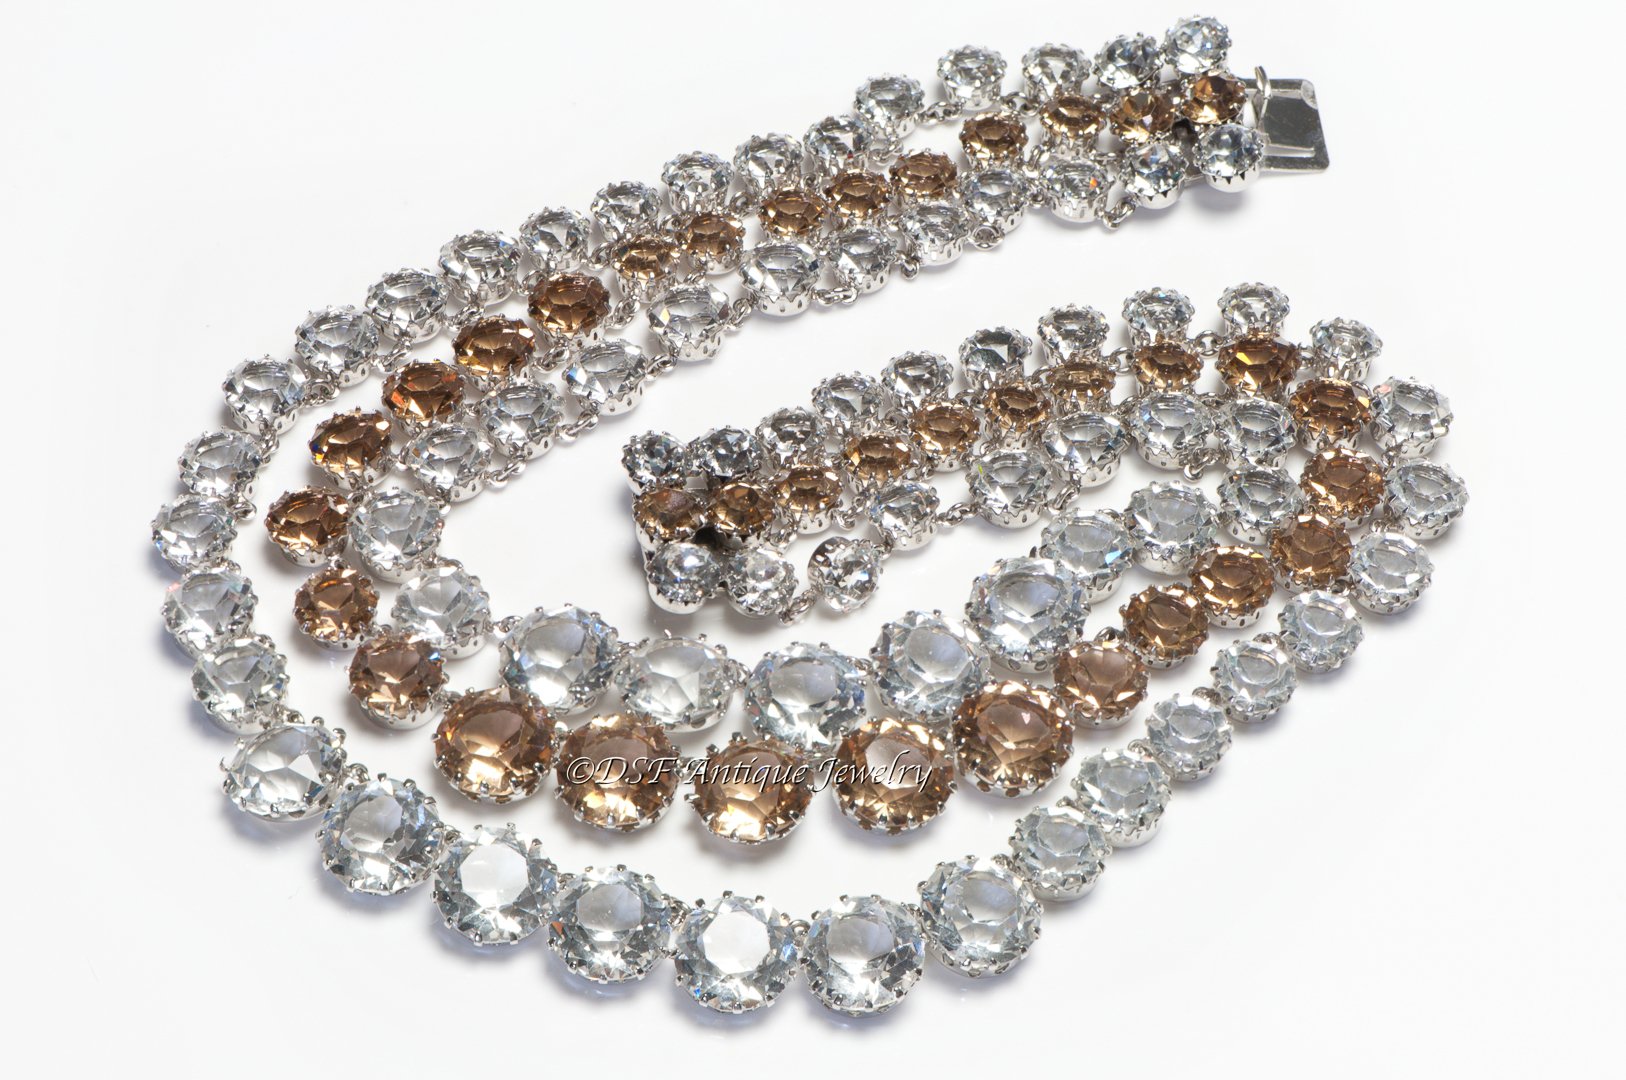 Christian Dior Couture 1960 Yves Saint Laurent Crystal Riviere Collar Necklace - DSF Antique Jewelry